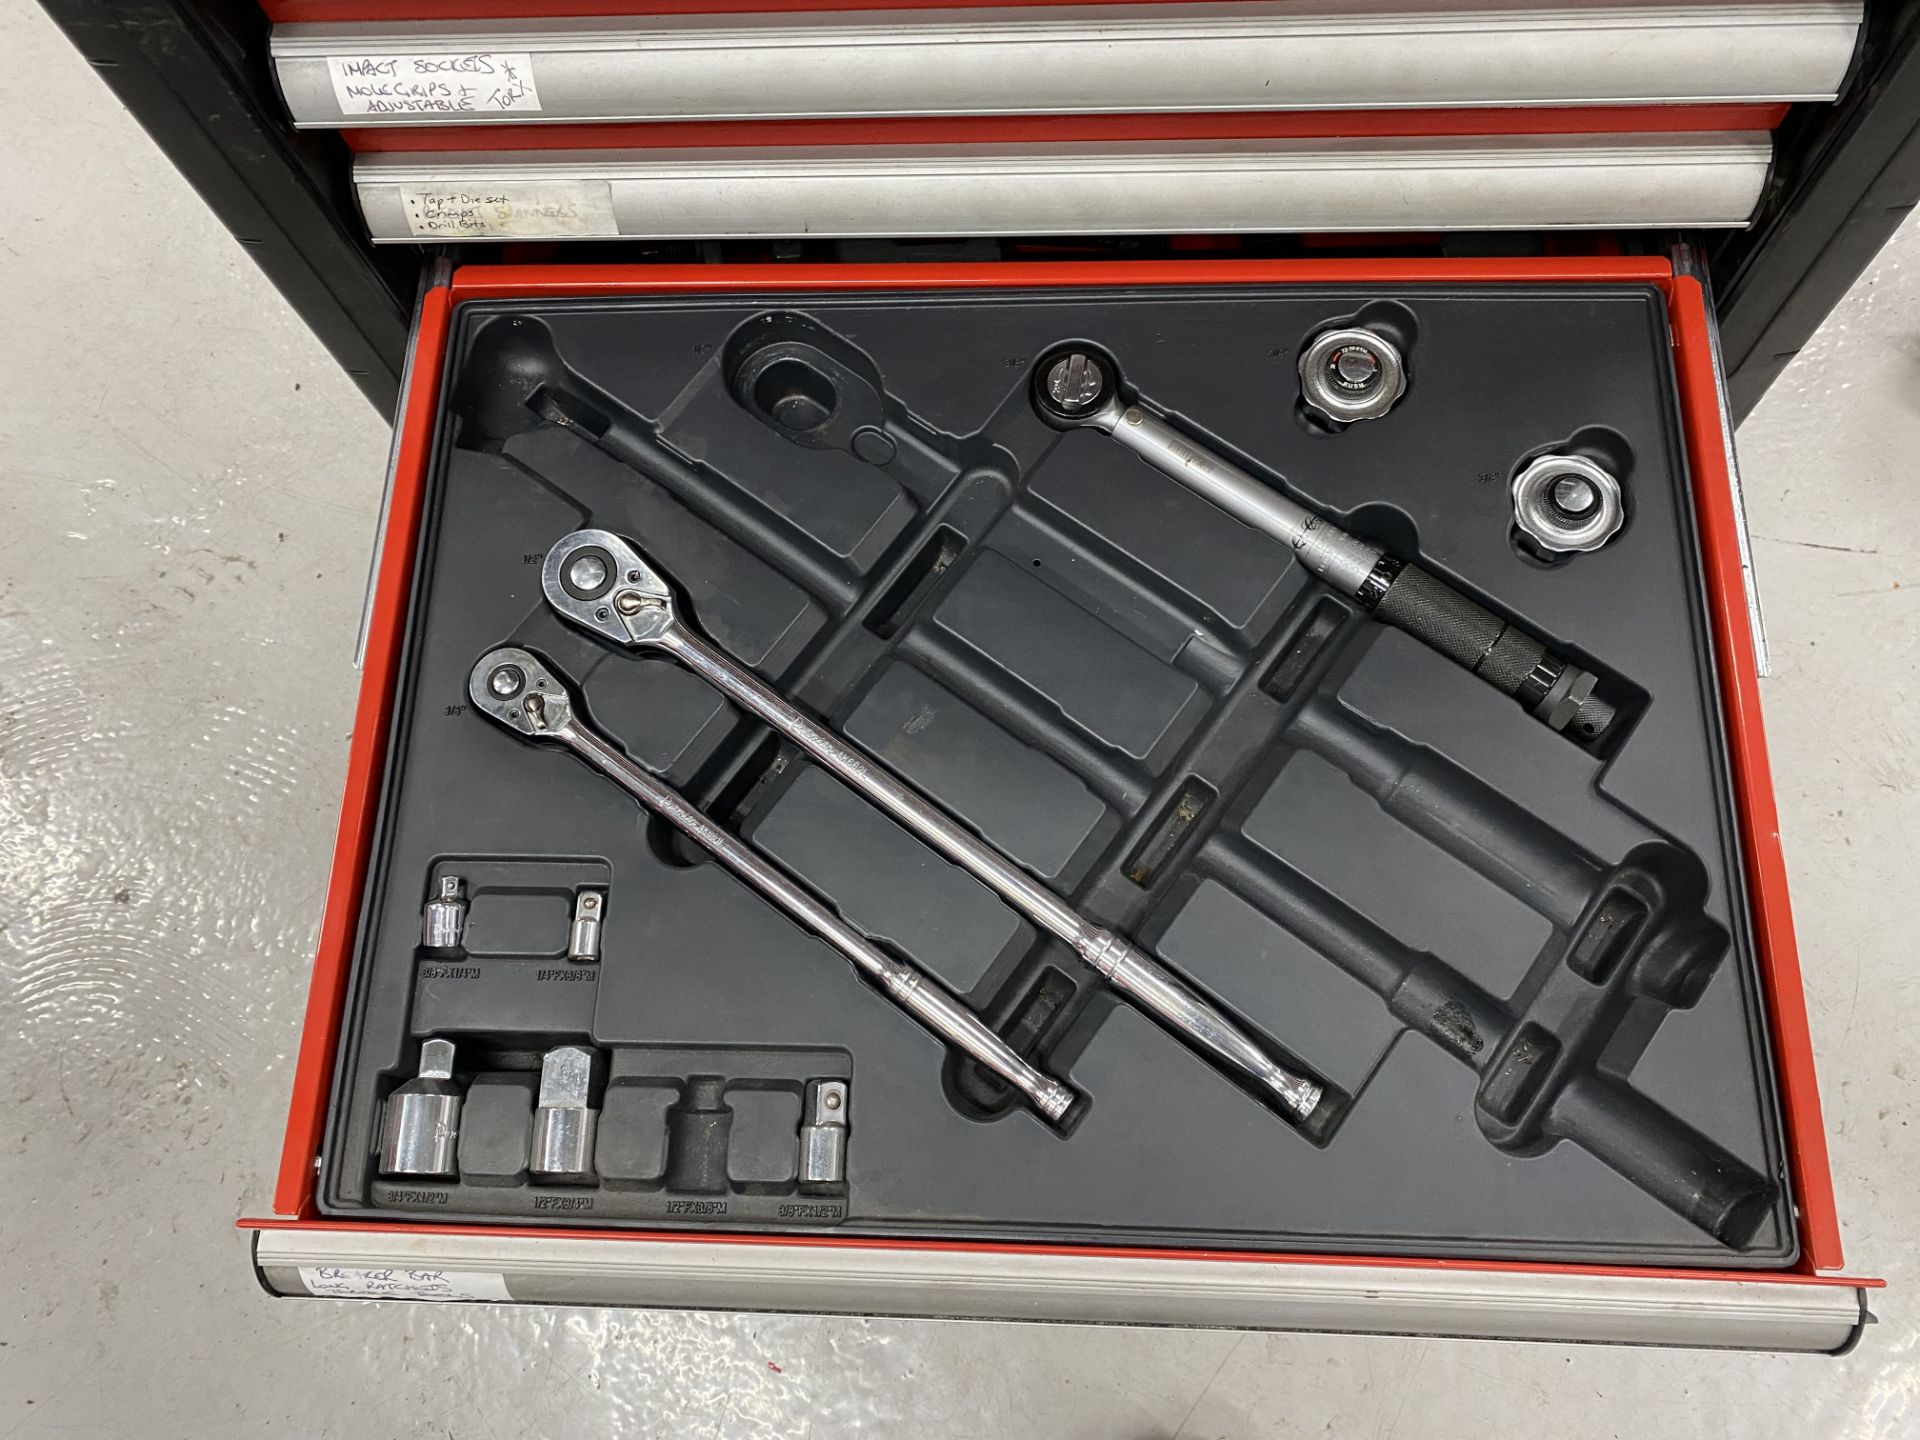 Sealey 10 drawer mobile toolbox including the following tools, rings and open ended spanners 7mm- - Image 10 of 11